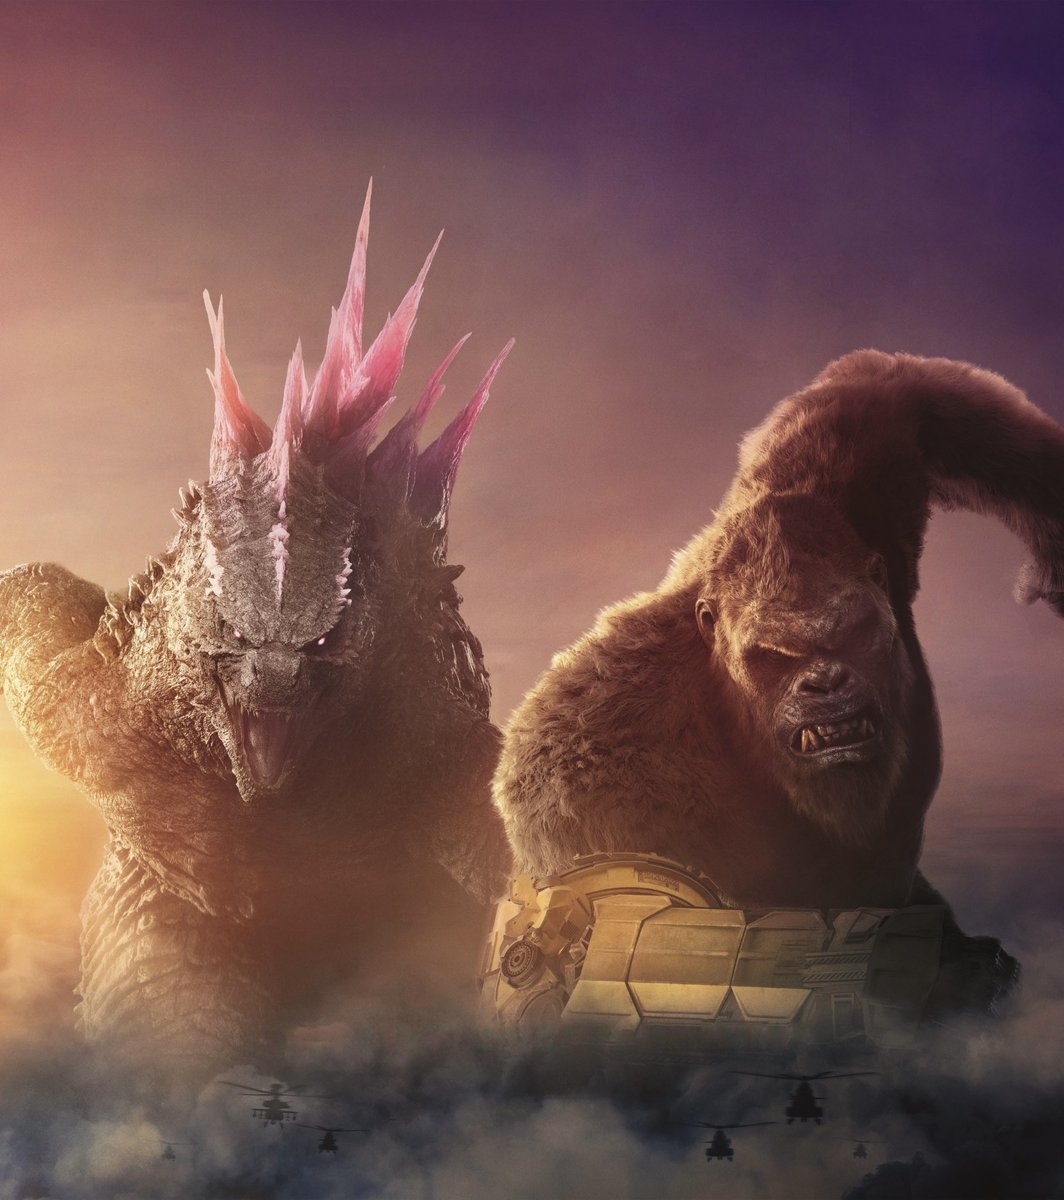 Dave Callaham (‘Across the Spider-Verse’) is set to write the next ‘GODZILLA X KONG’ movie.

(Source: hollywoodreporter.com/movies/movie-n…)